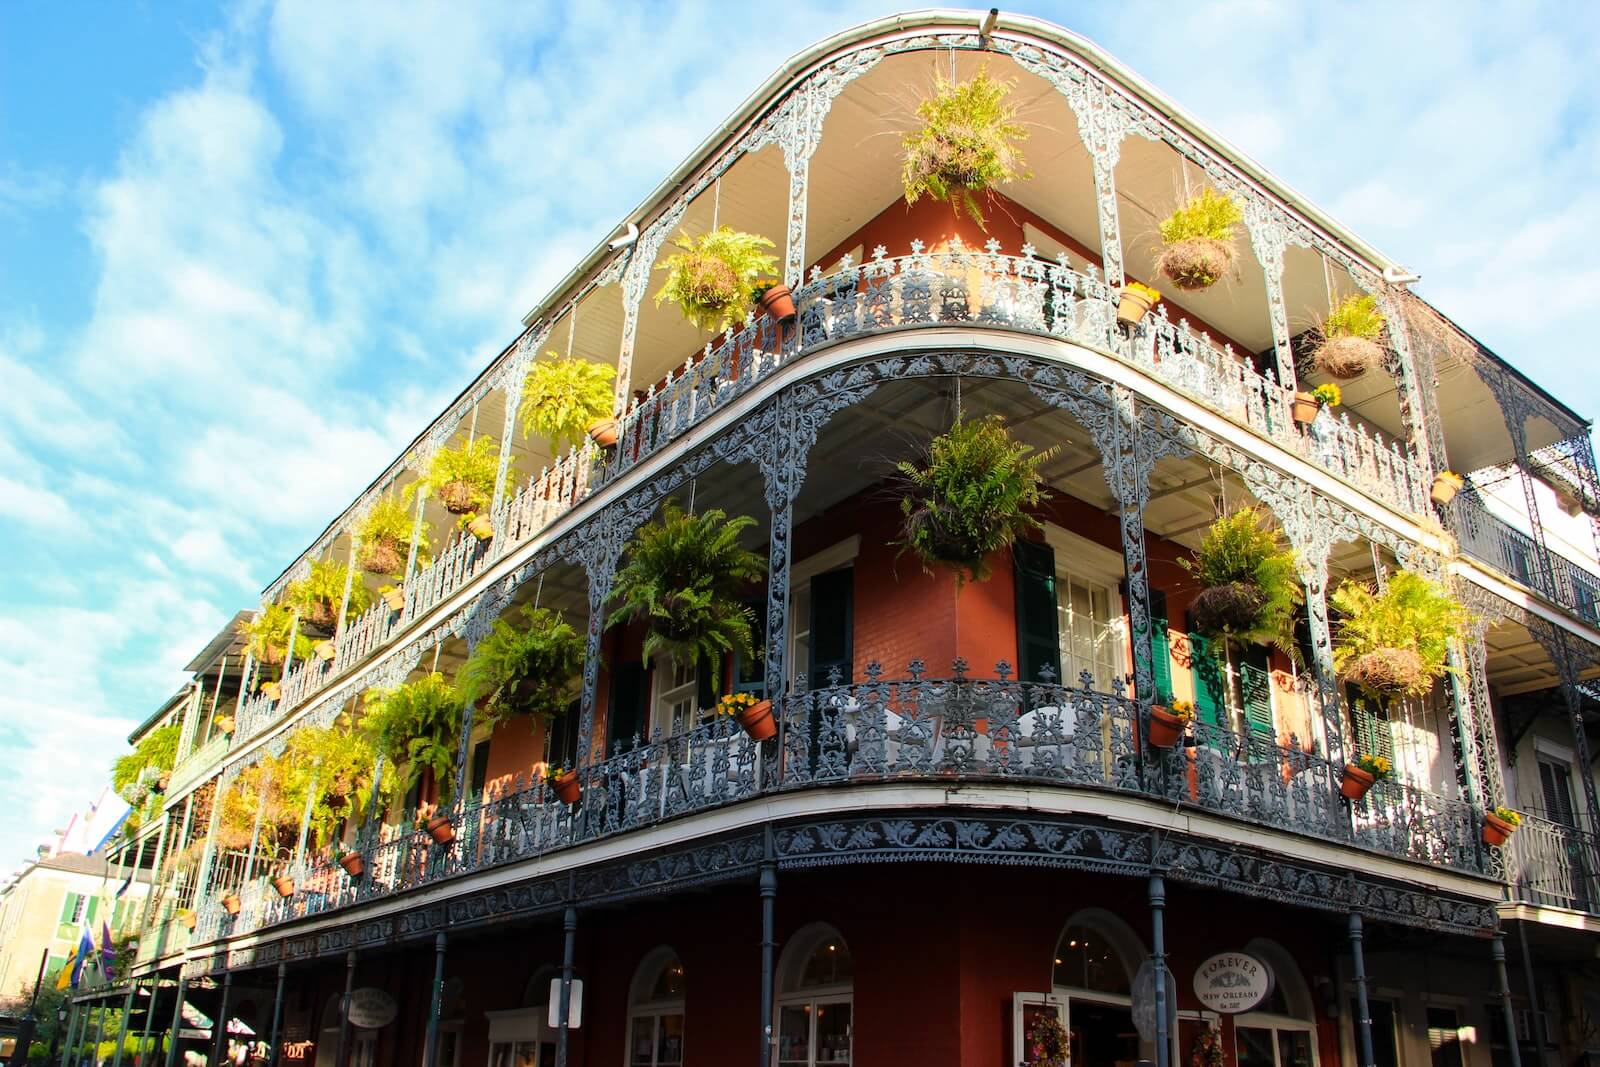 Building in French Quarter of New Orleans